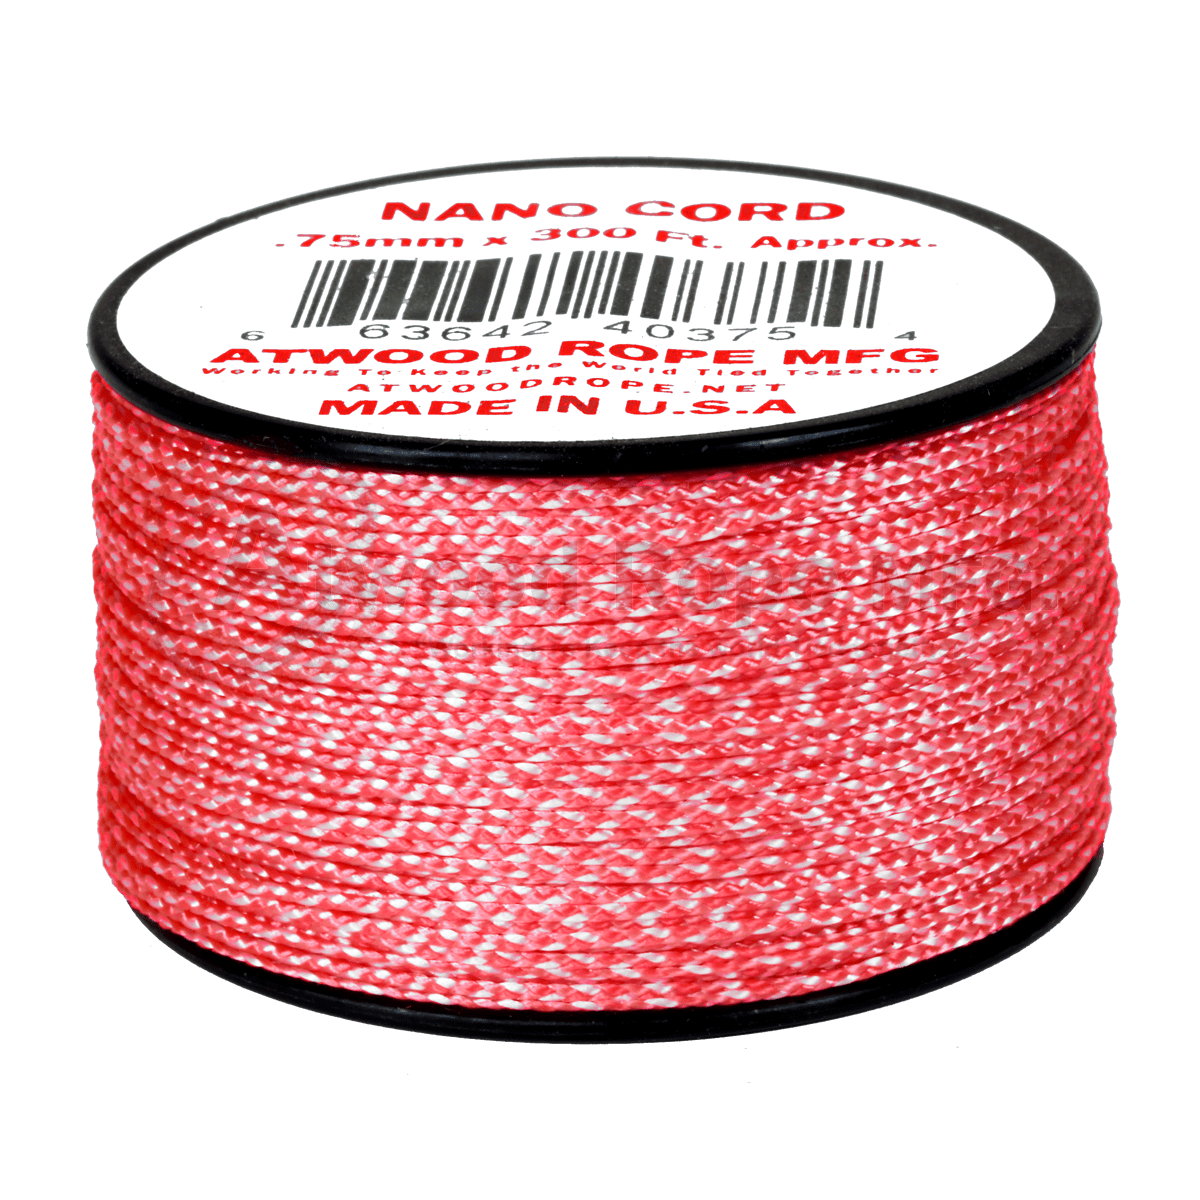 Atwood Rope MFG - .75mm Nano Cord - Teal - 300ft 